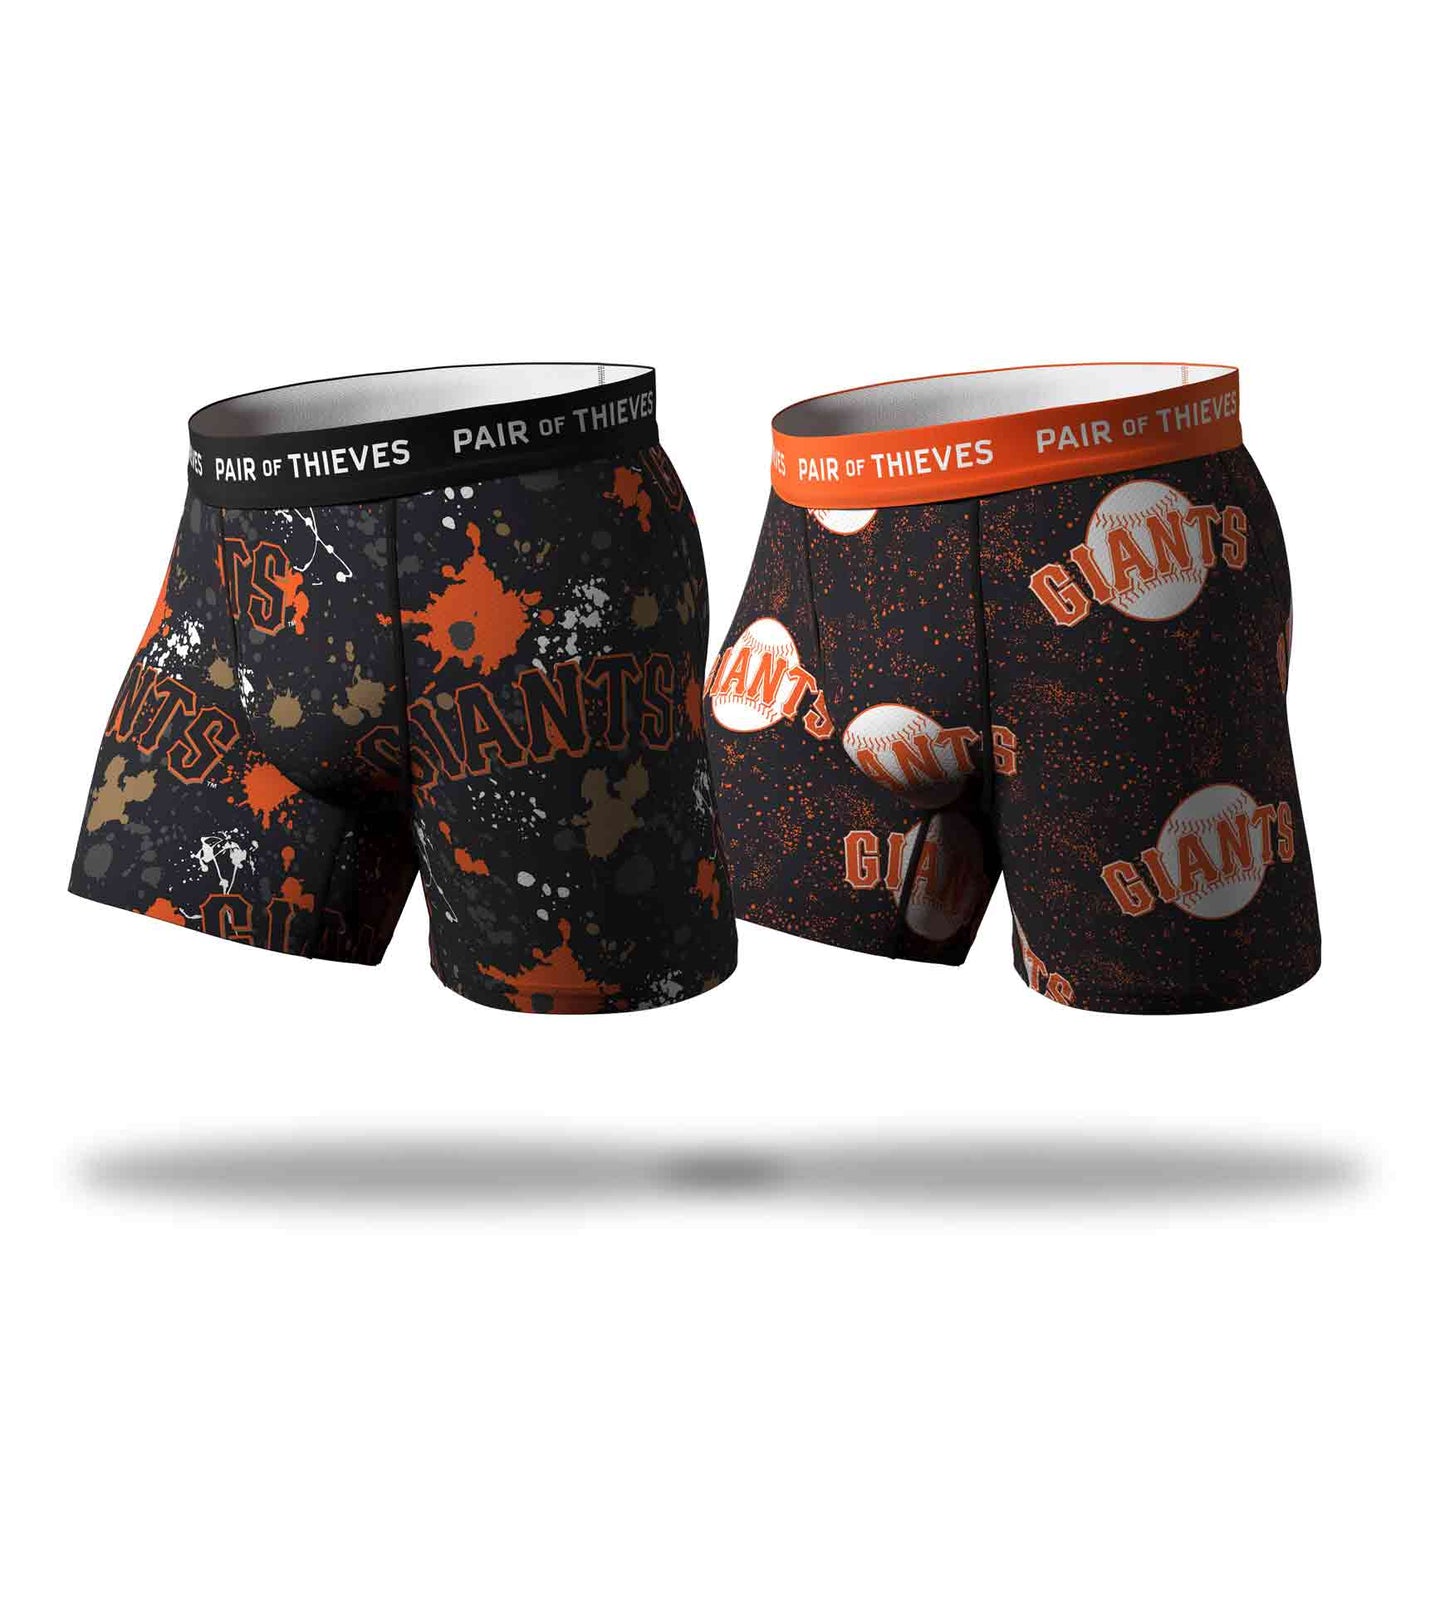 MLB San Francisco Giants SuperFit Boxer Brief 2 Pack containing the colors Saddle brown, Sienna, Silver, Dark olive green, Black, Tomato, Gains boro, Dark slate gray, Gray